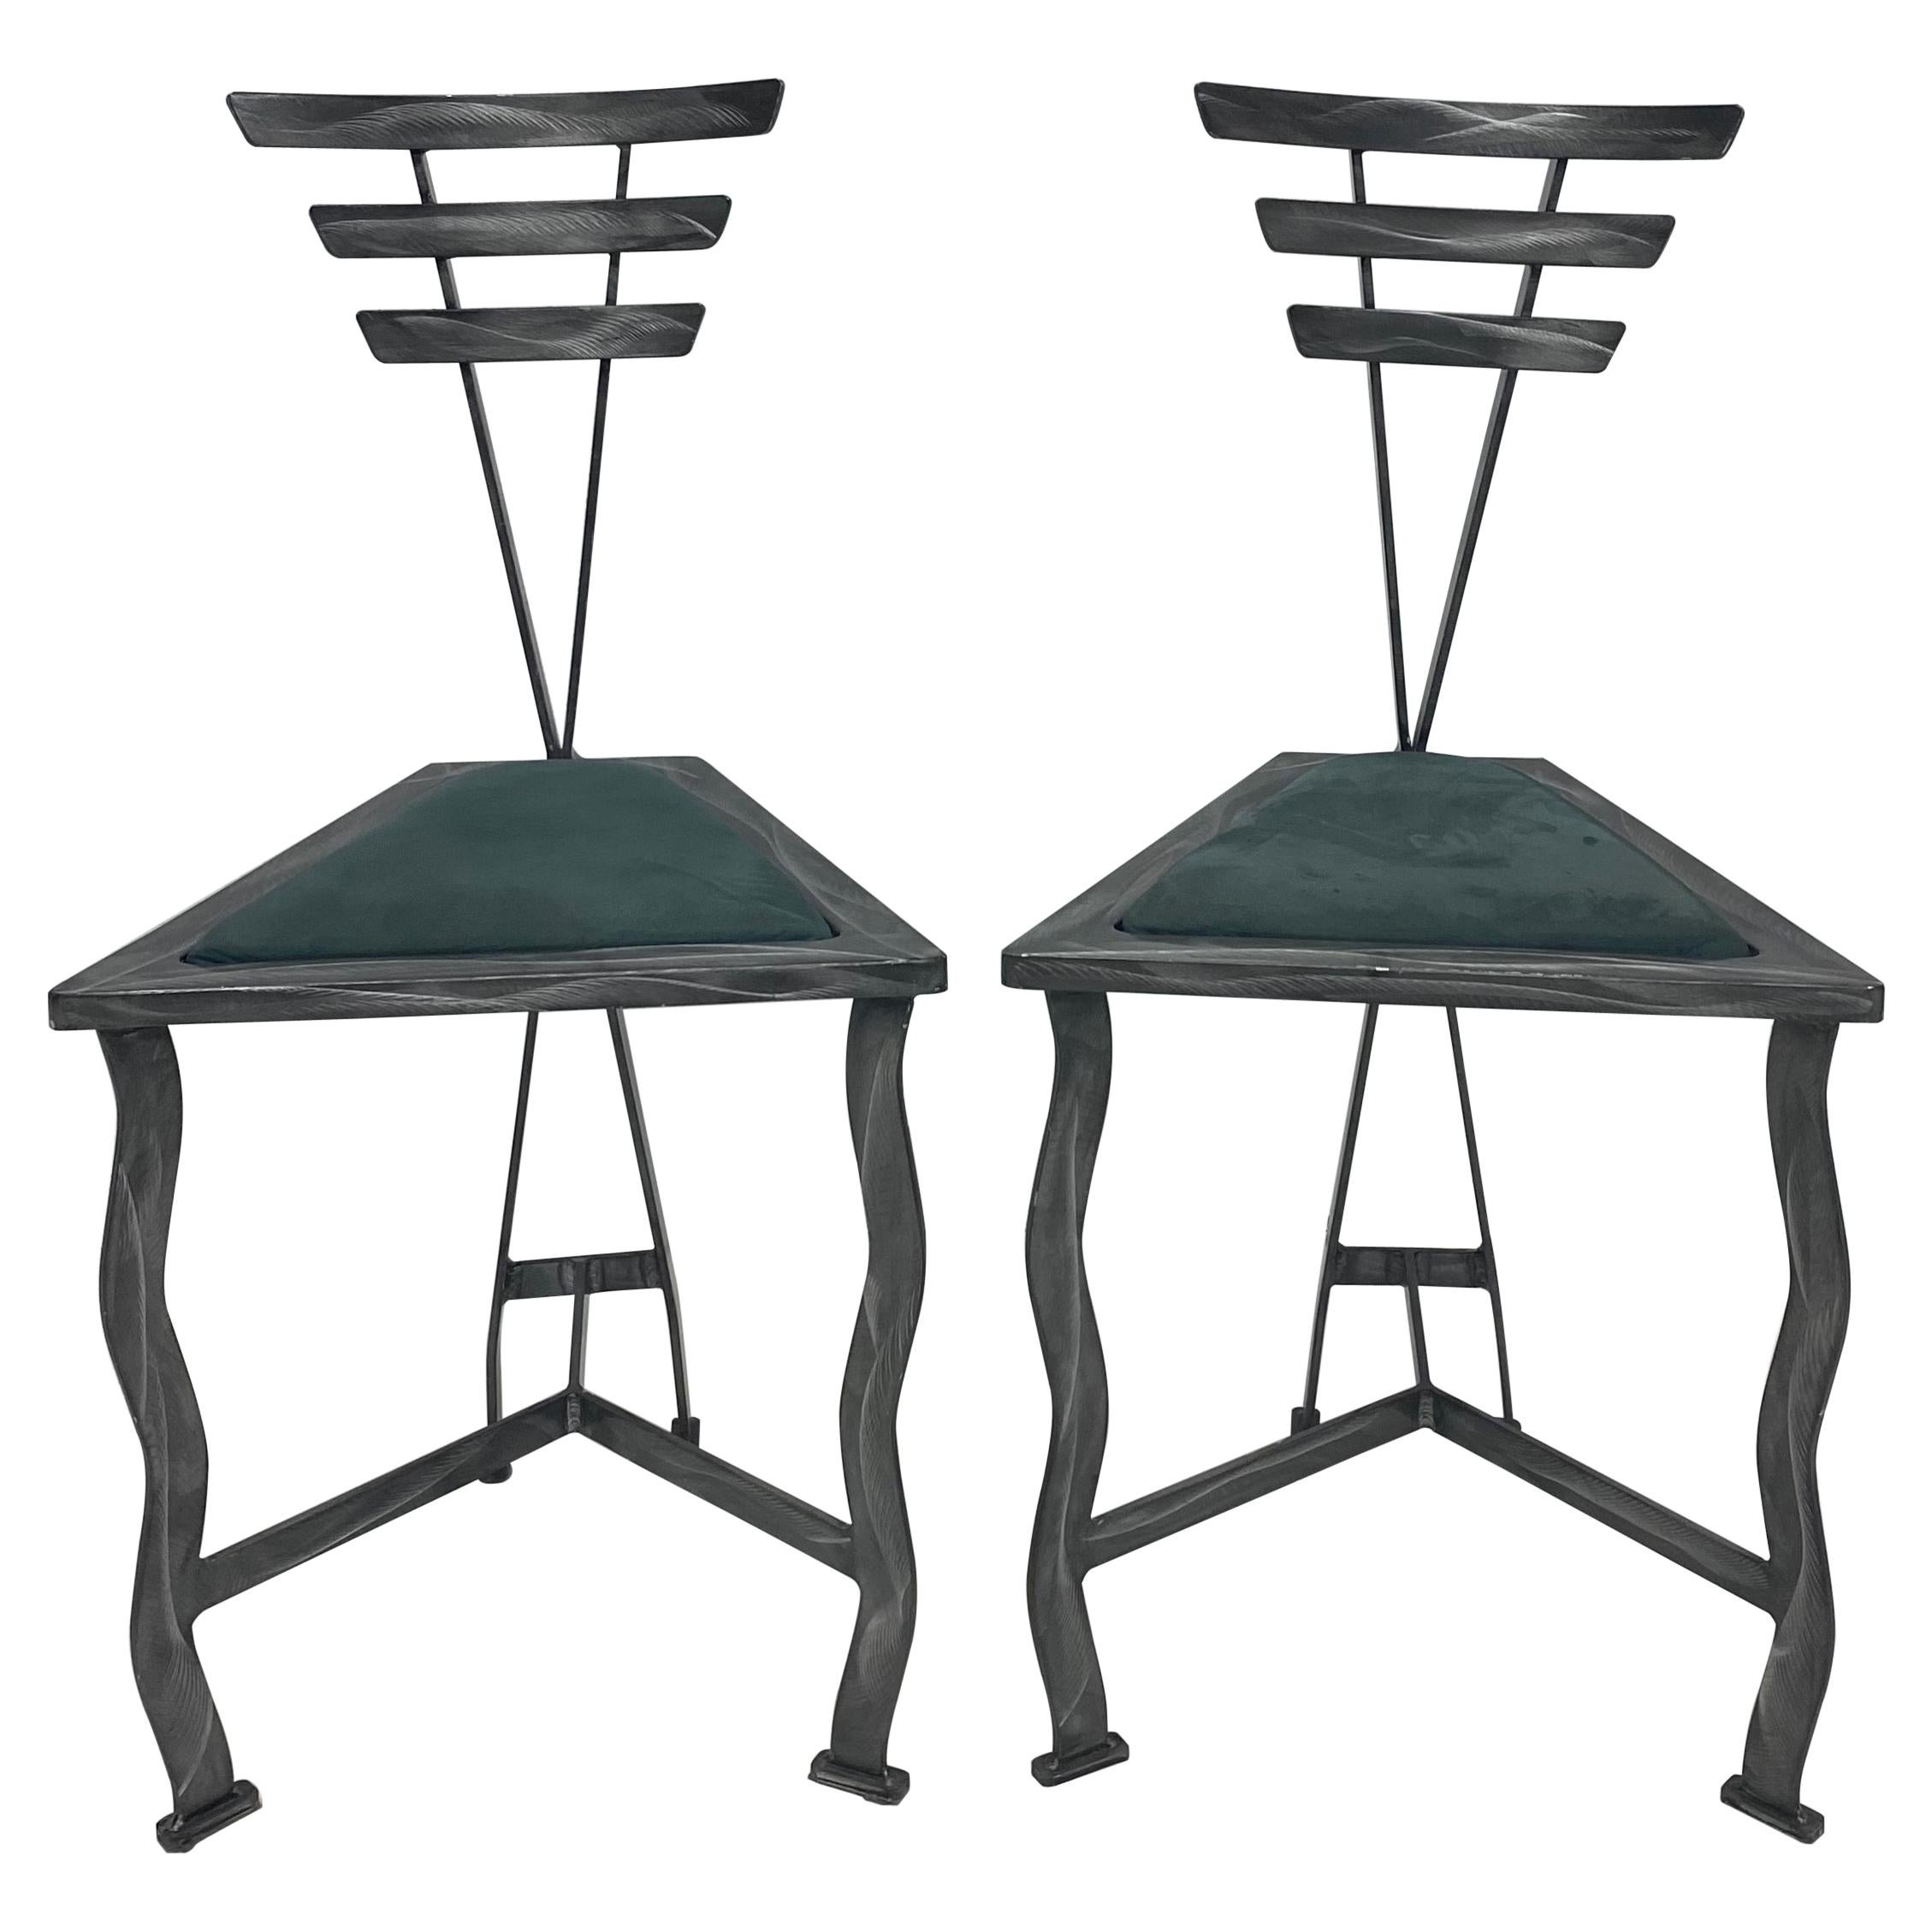 90s Postmodern Contemporary Welded Steel Studio Side Chairs, a Pair